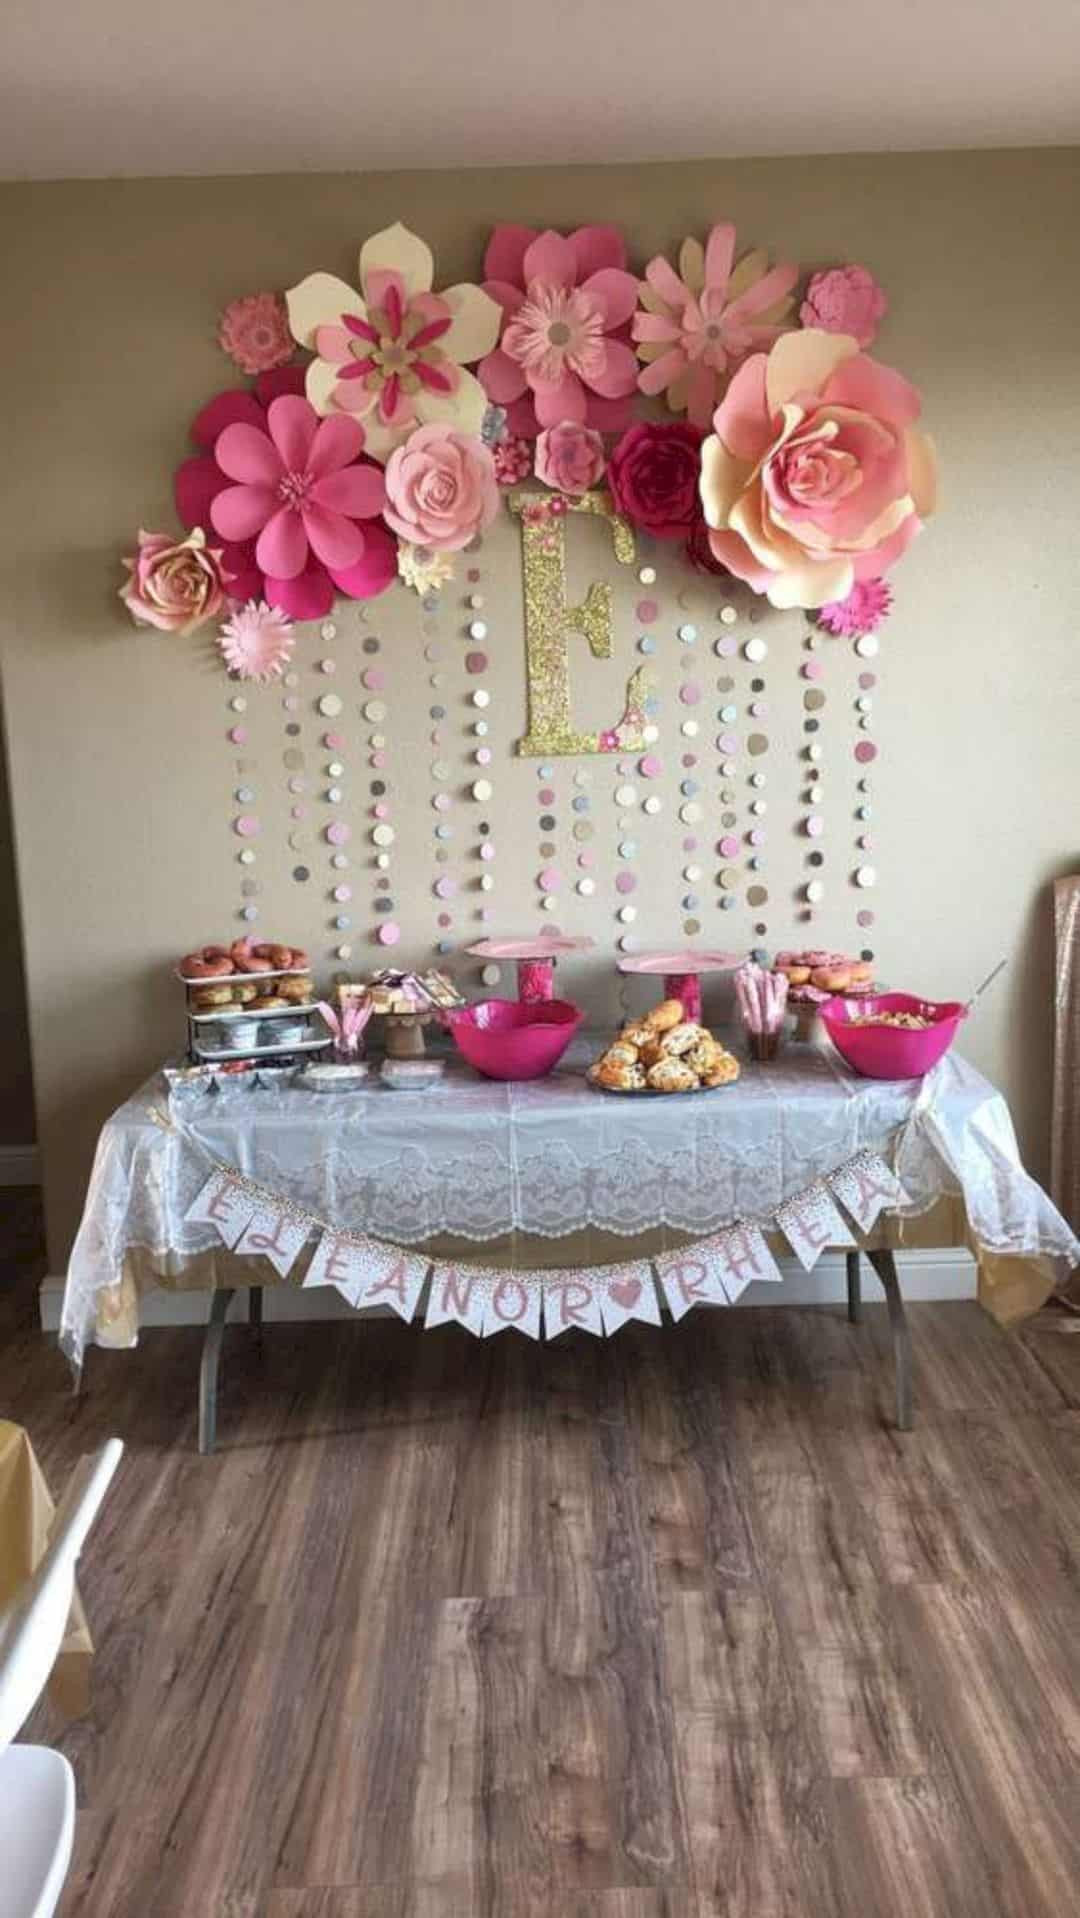 Baby Shower Decorations Girl Ideas
 16 Cute Baby Shower Decorating Ideas